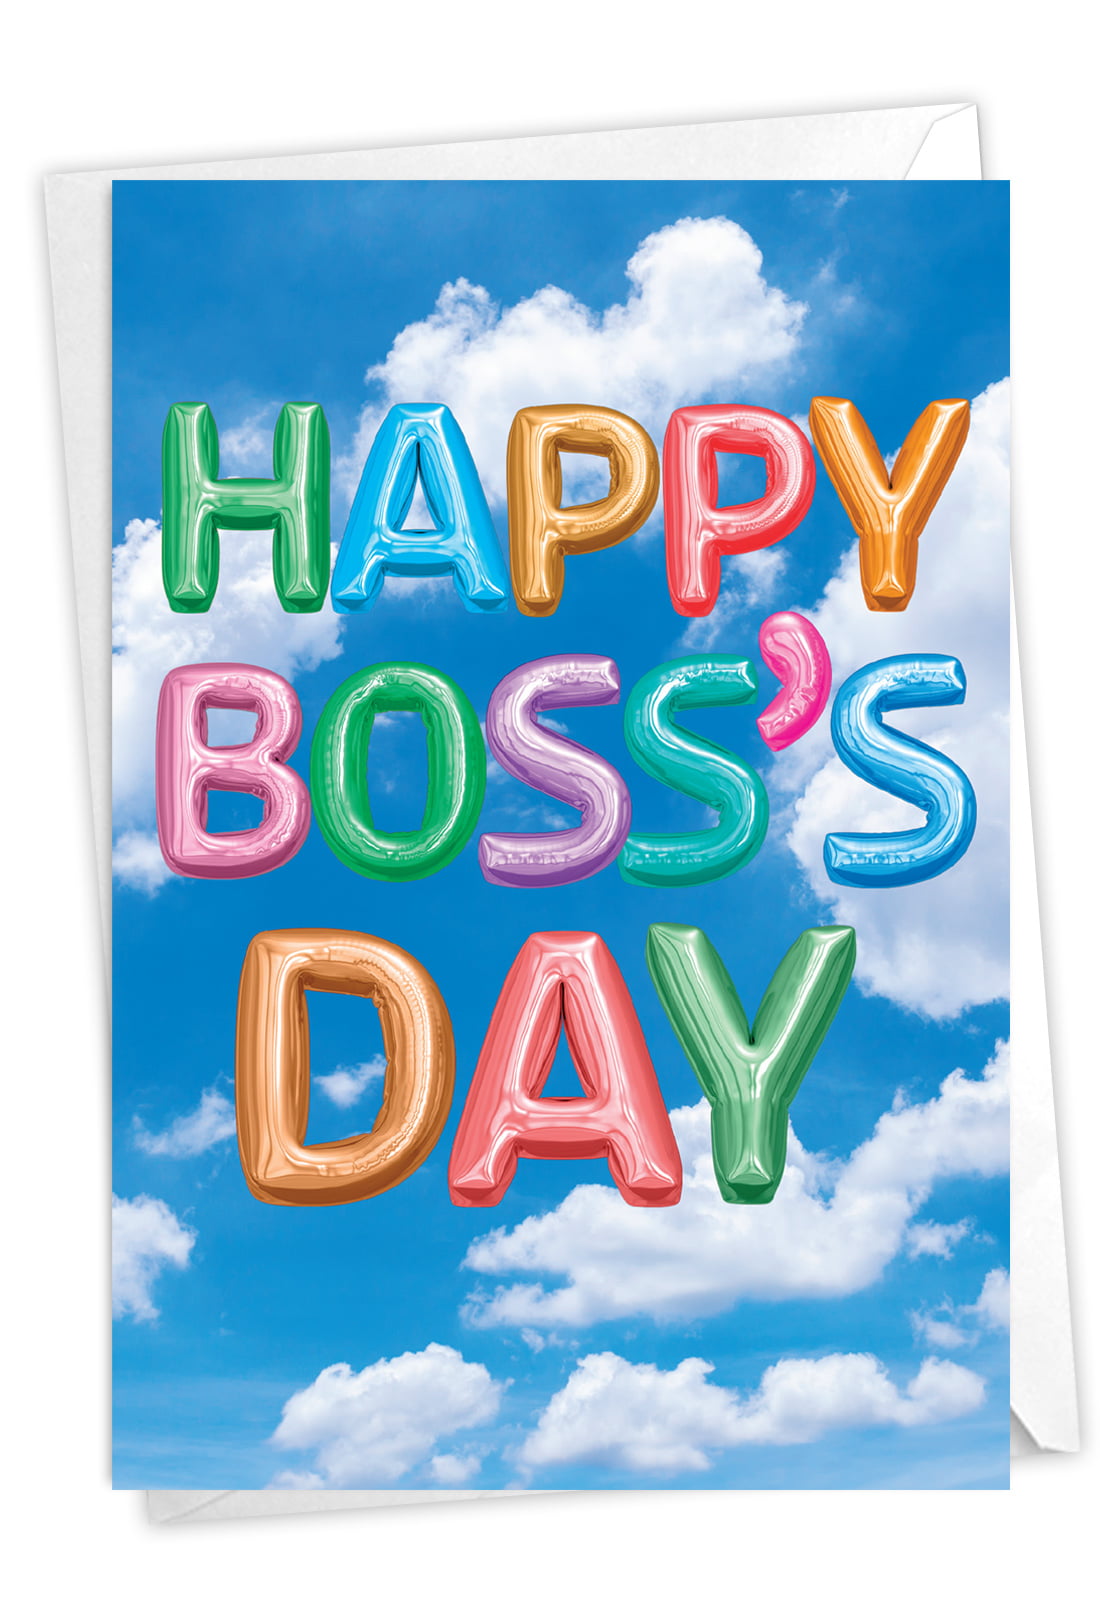 Happy Bosss Day Greeting Card Notecard For Boss Manager Mentor